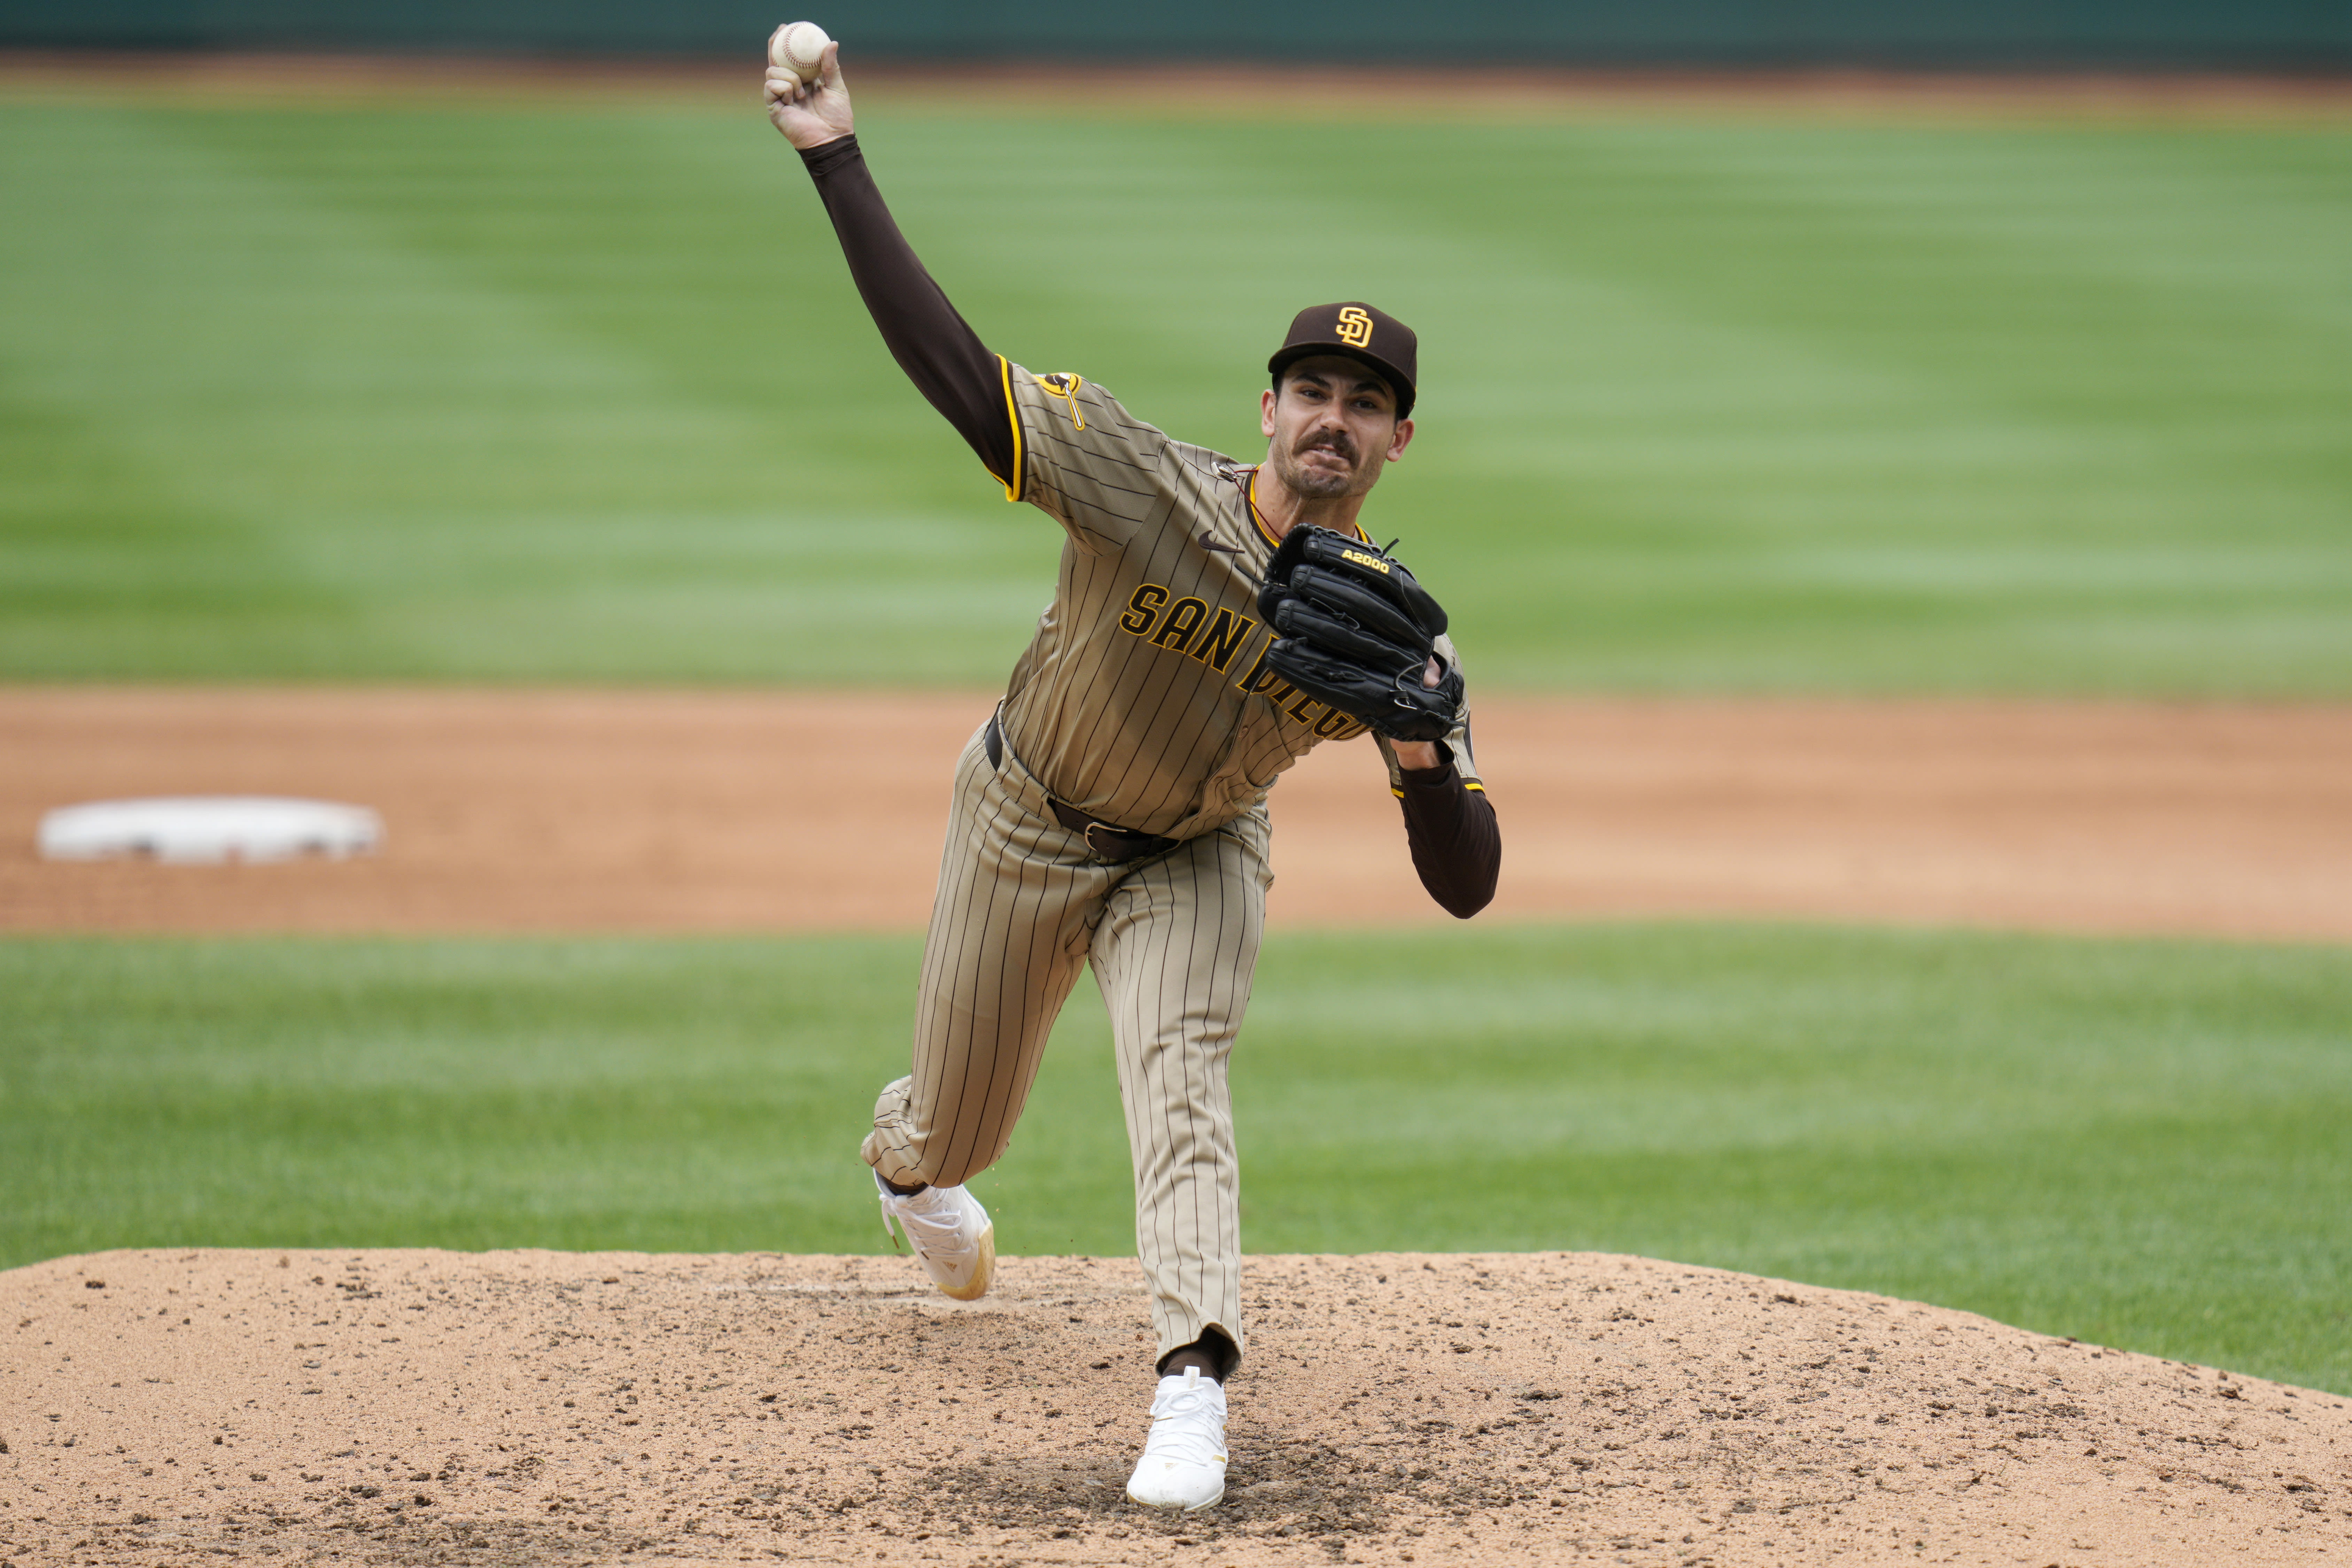 Dylan Cease's no-hitter marks the latest high point in his ascent with the Padres